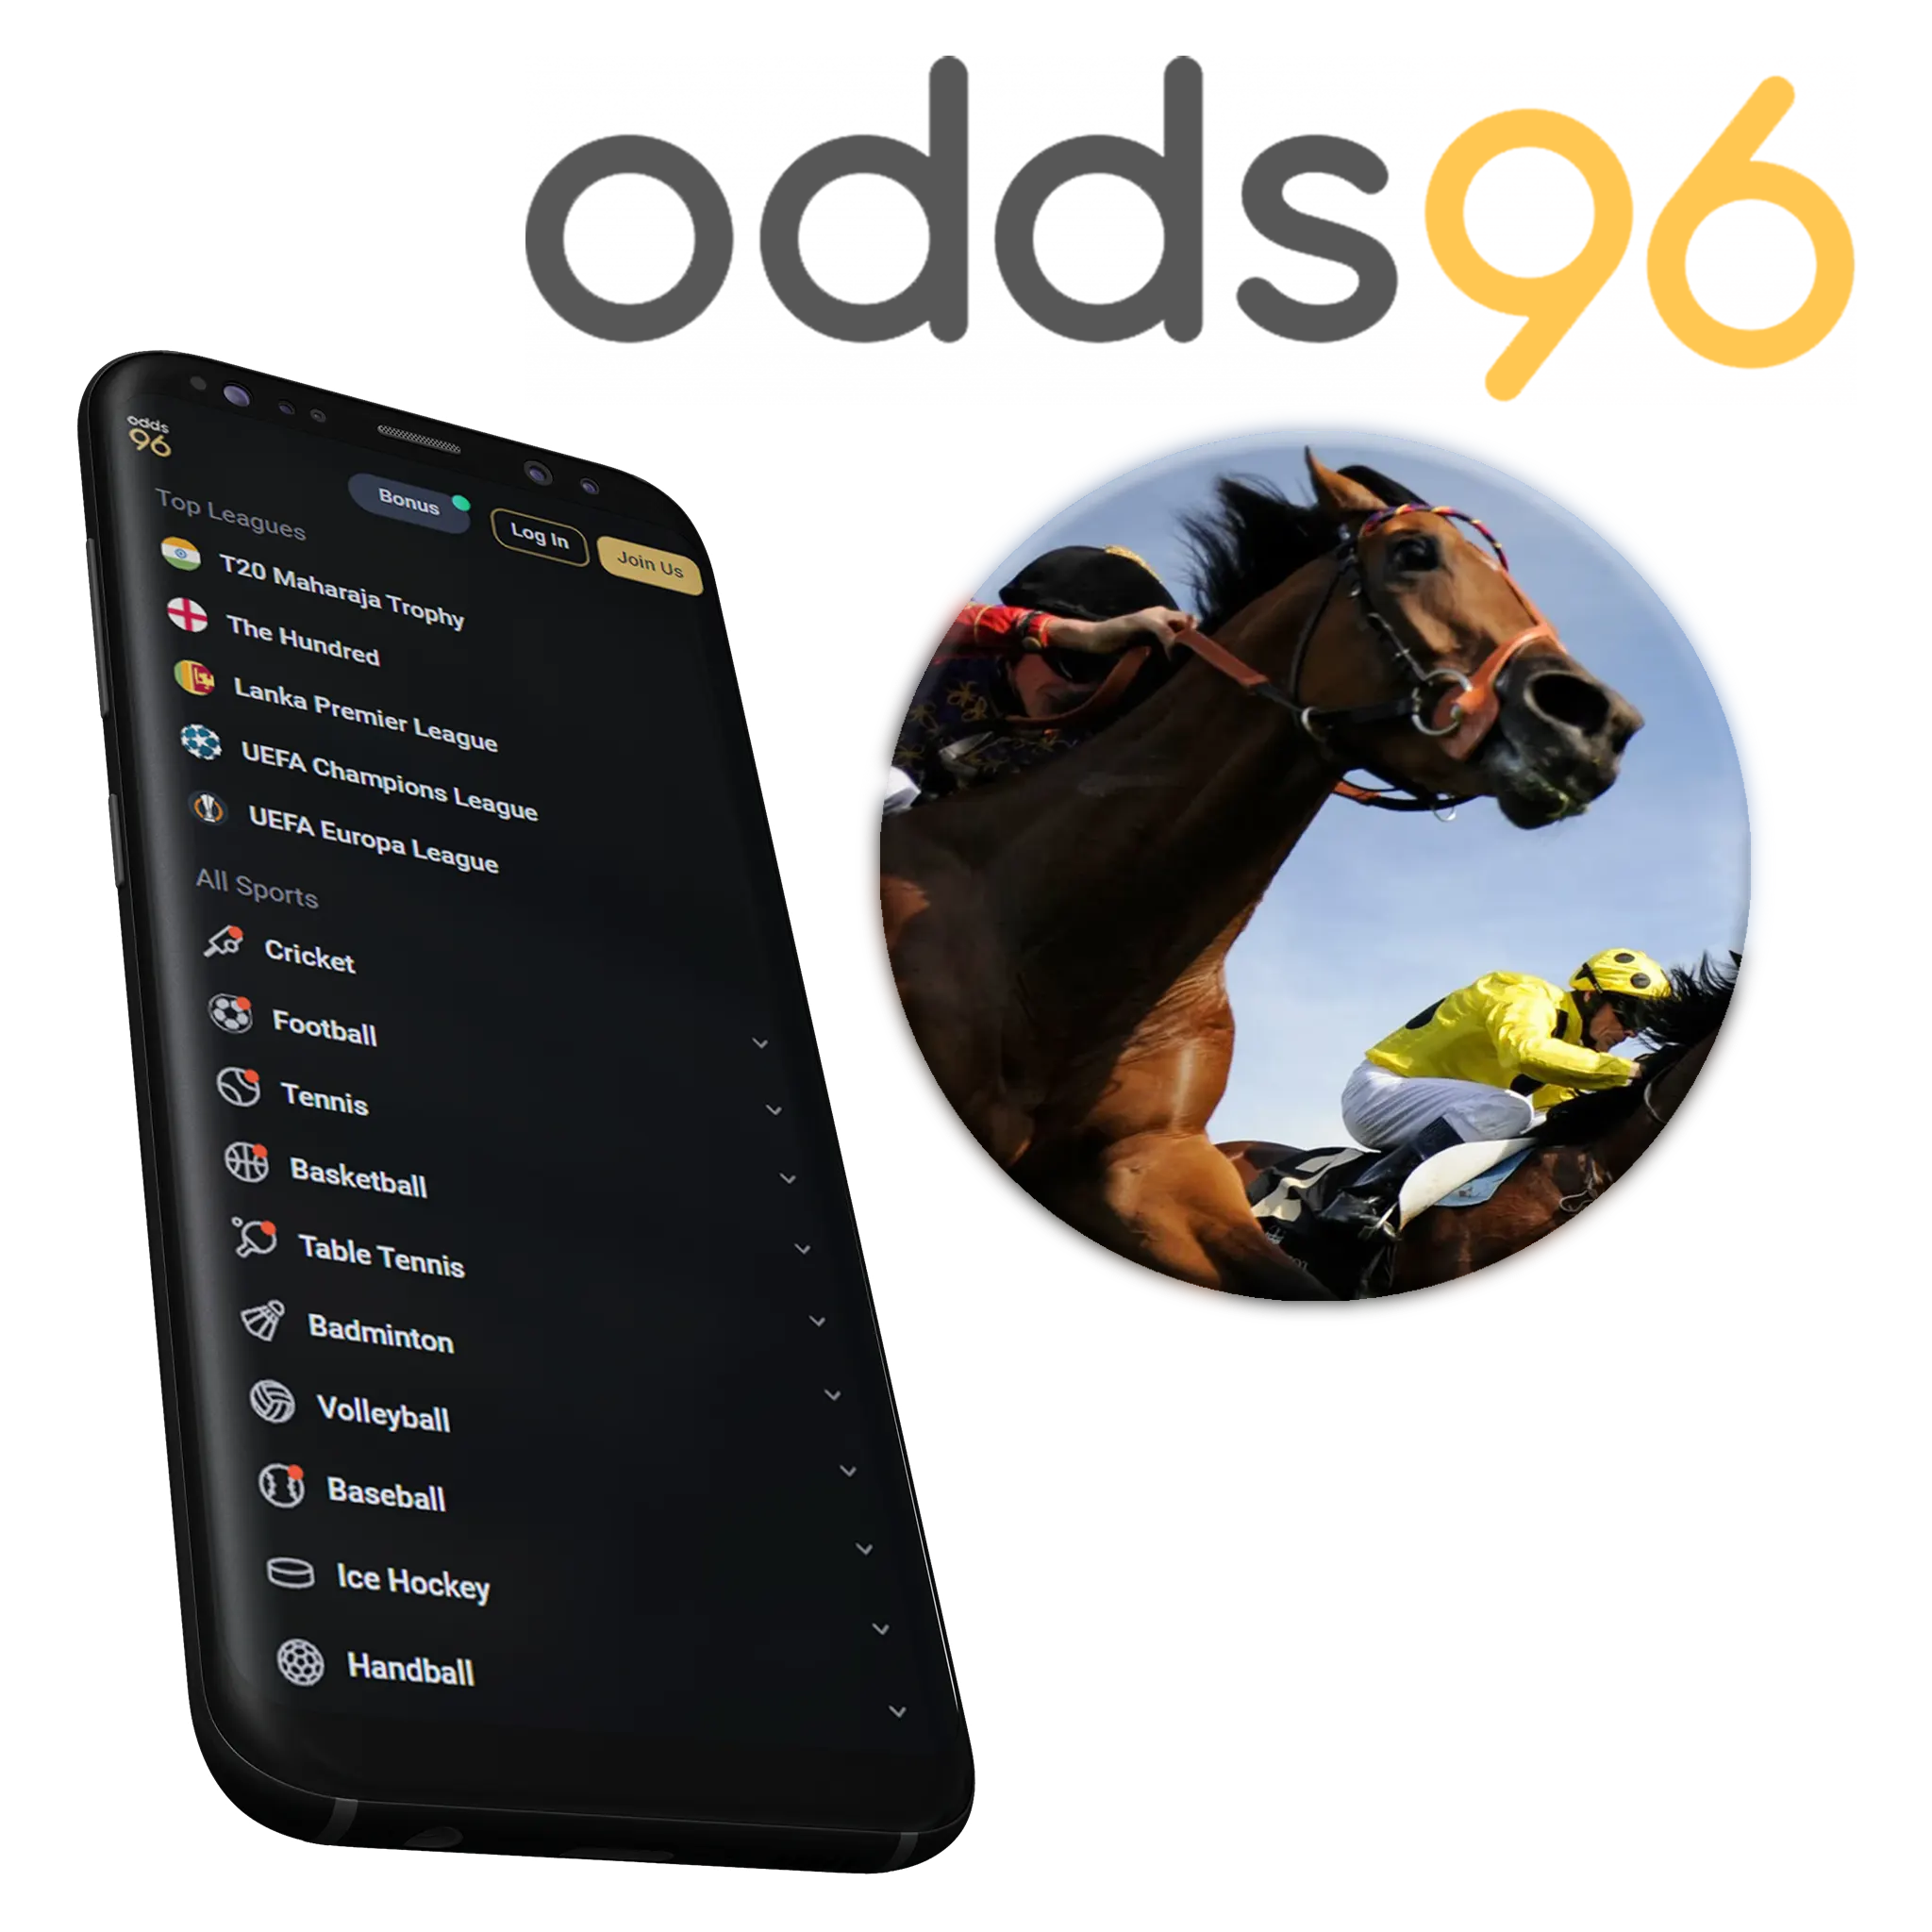 Odds96 mobile app is very convenient to place bets on horse racing.